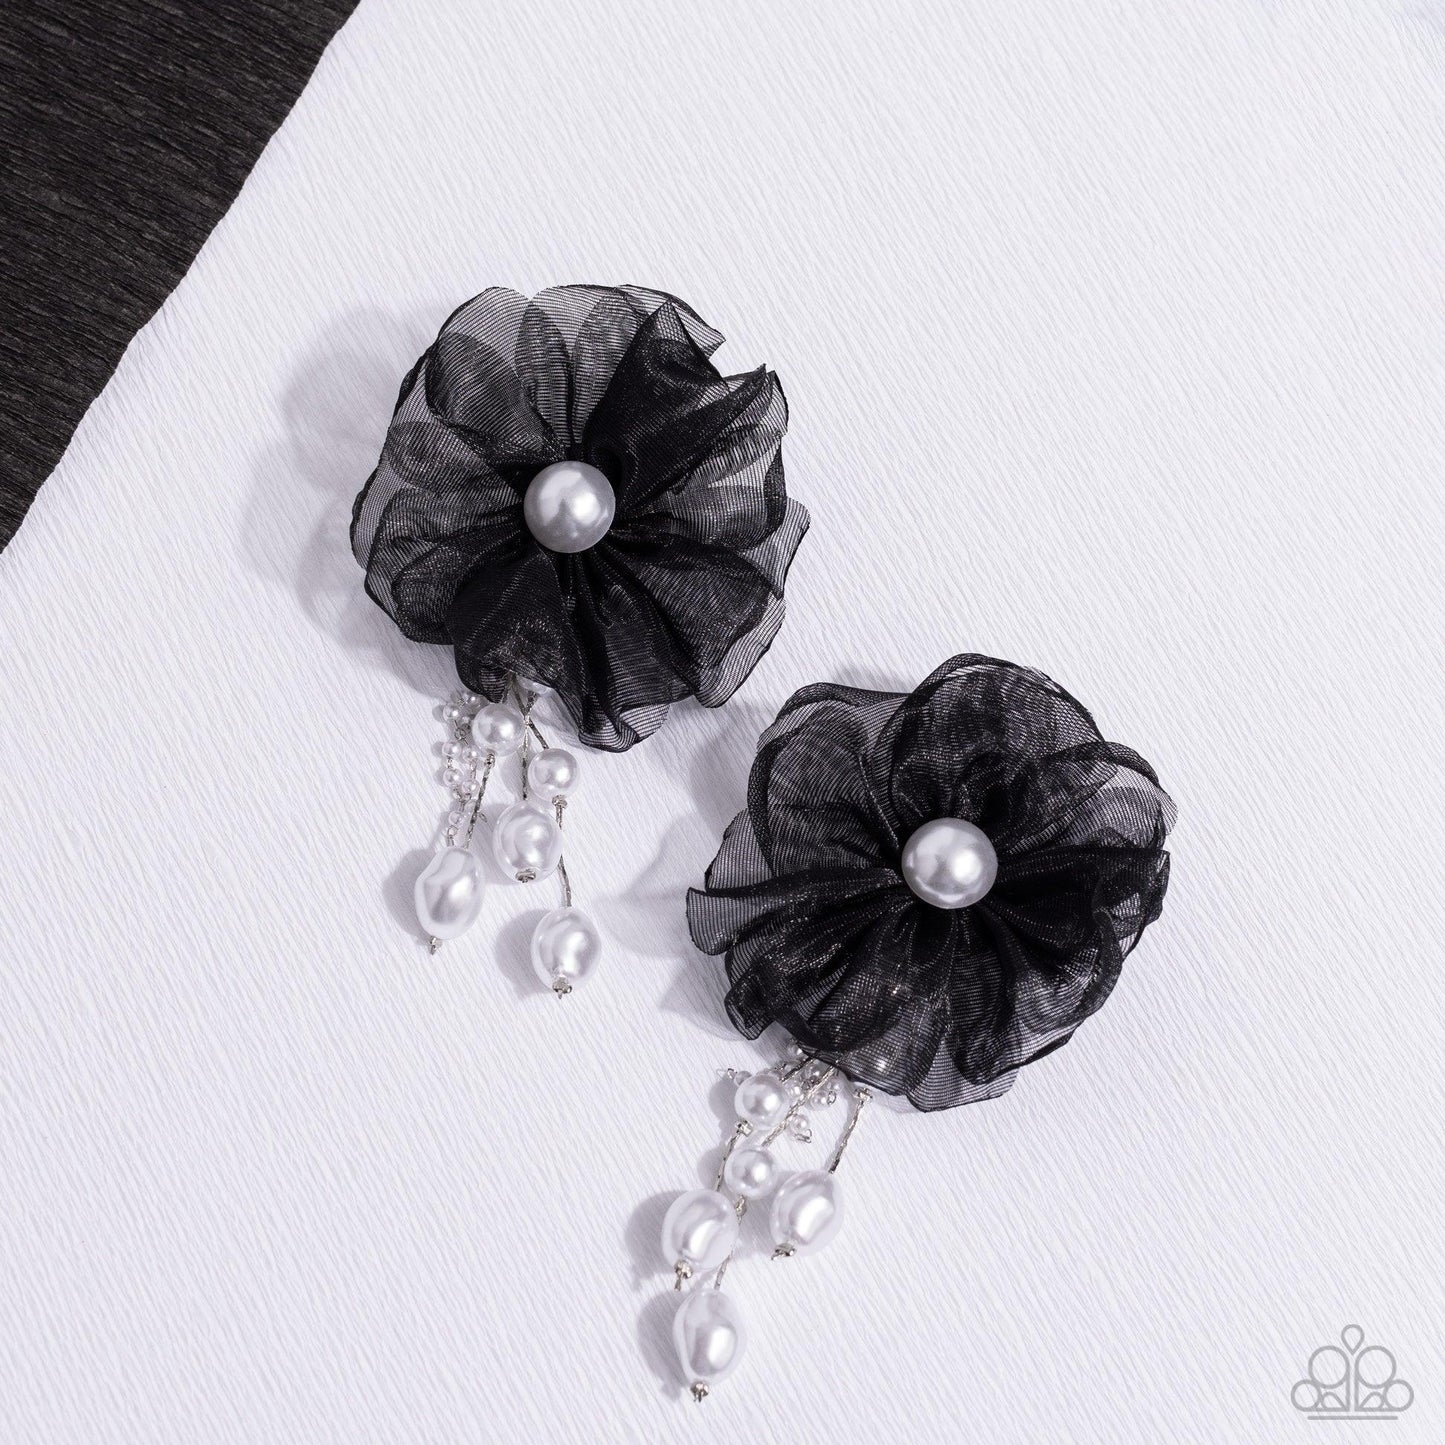 Paparazzi Accessories - Dripping In Decadence - Black Earrings - Bling by JessieK